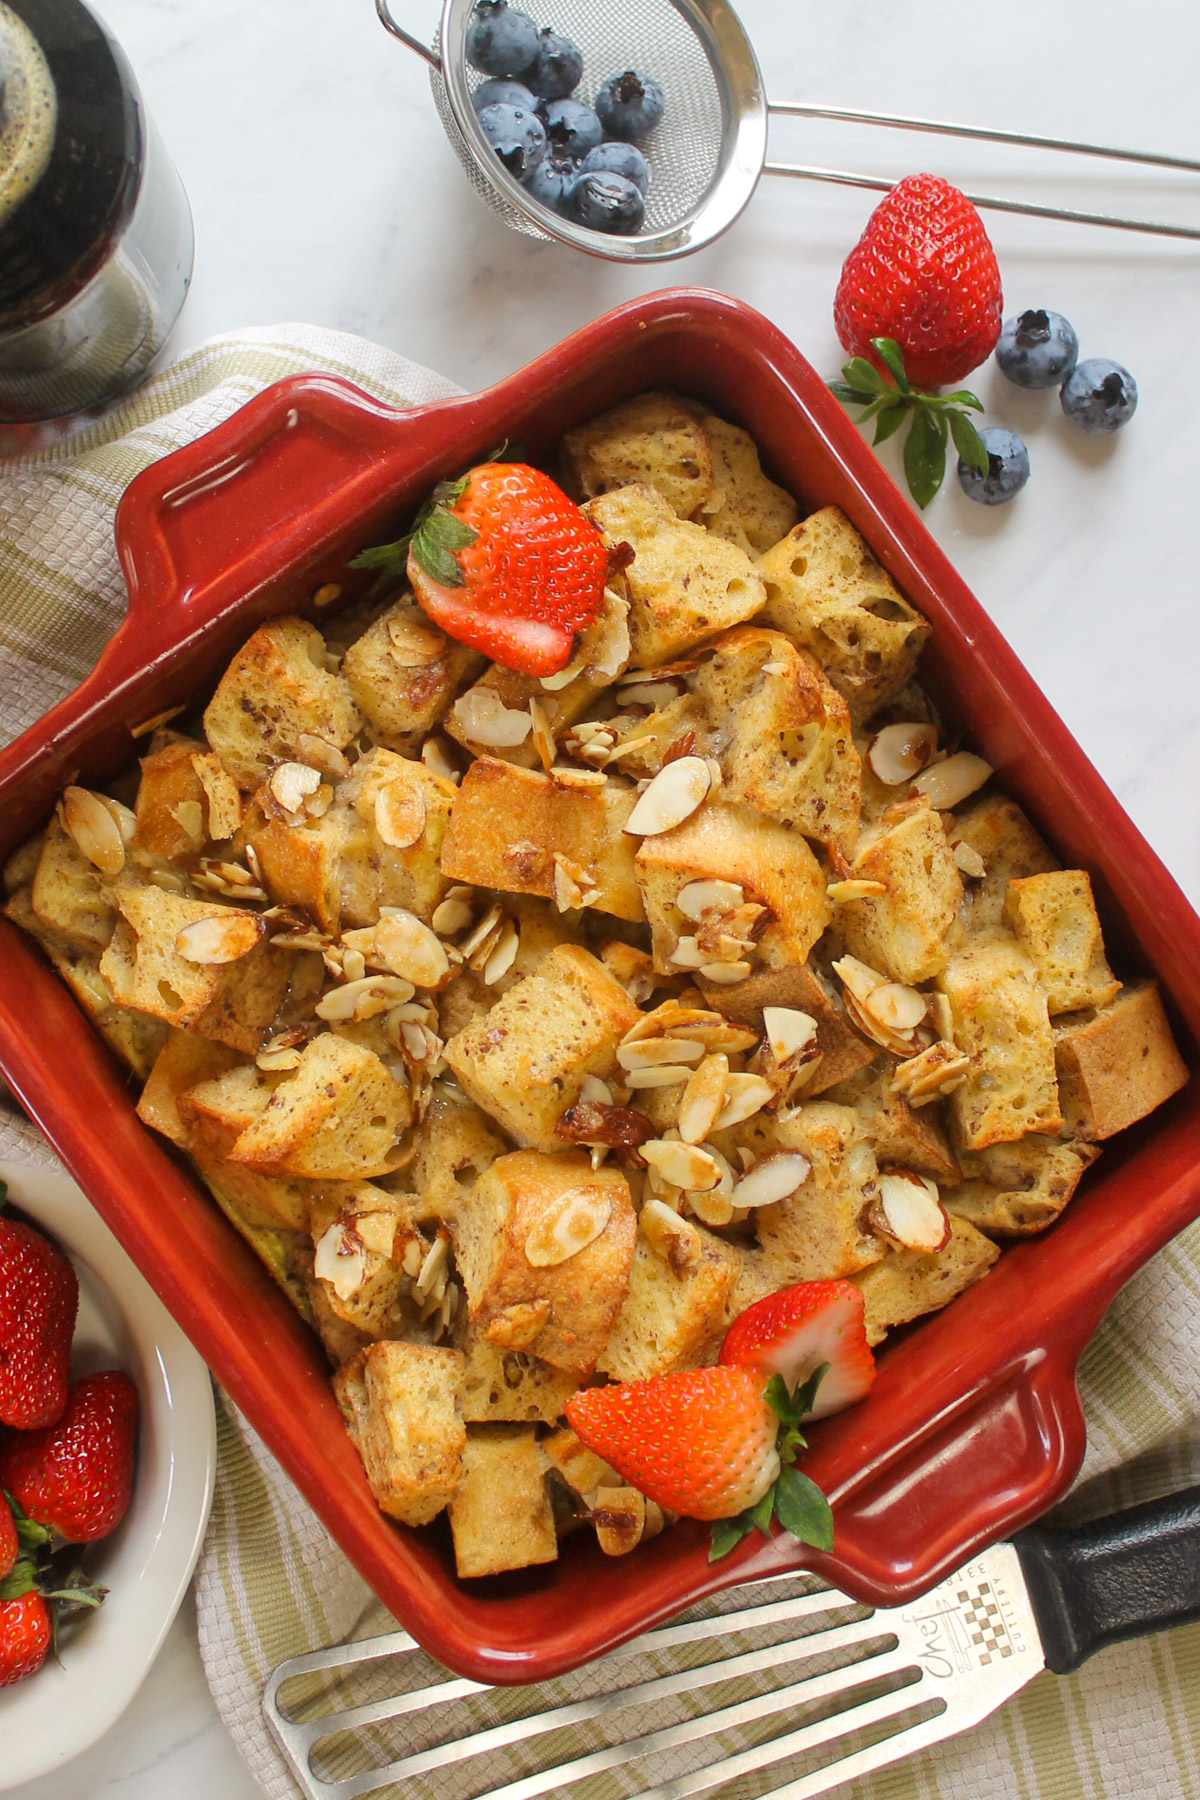 A French Toast Bake Casserole in a a red square pan with strawberries and blueberries.